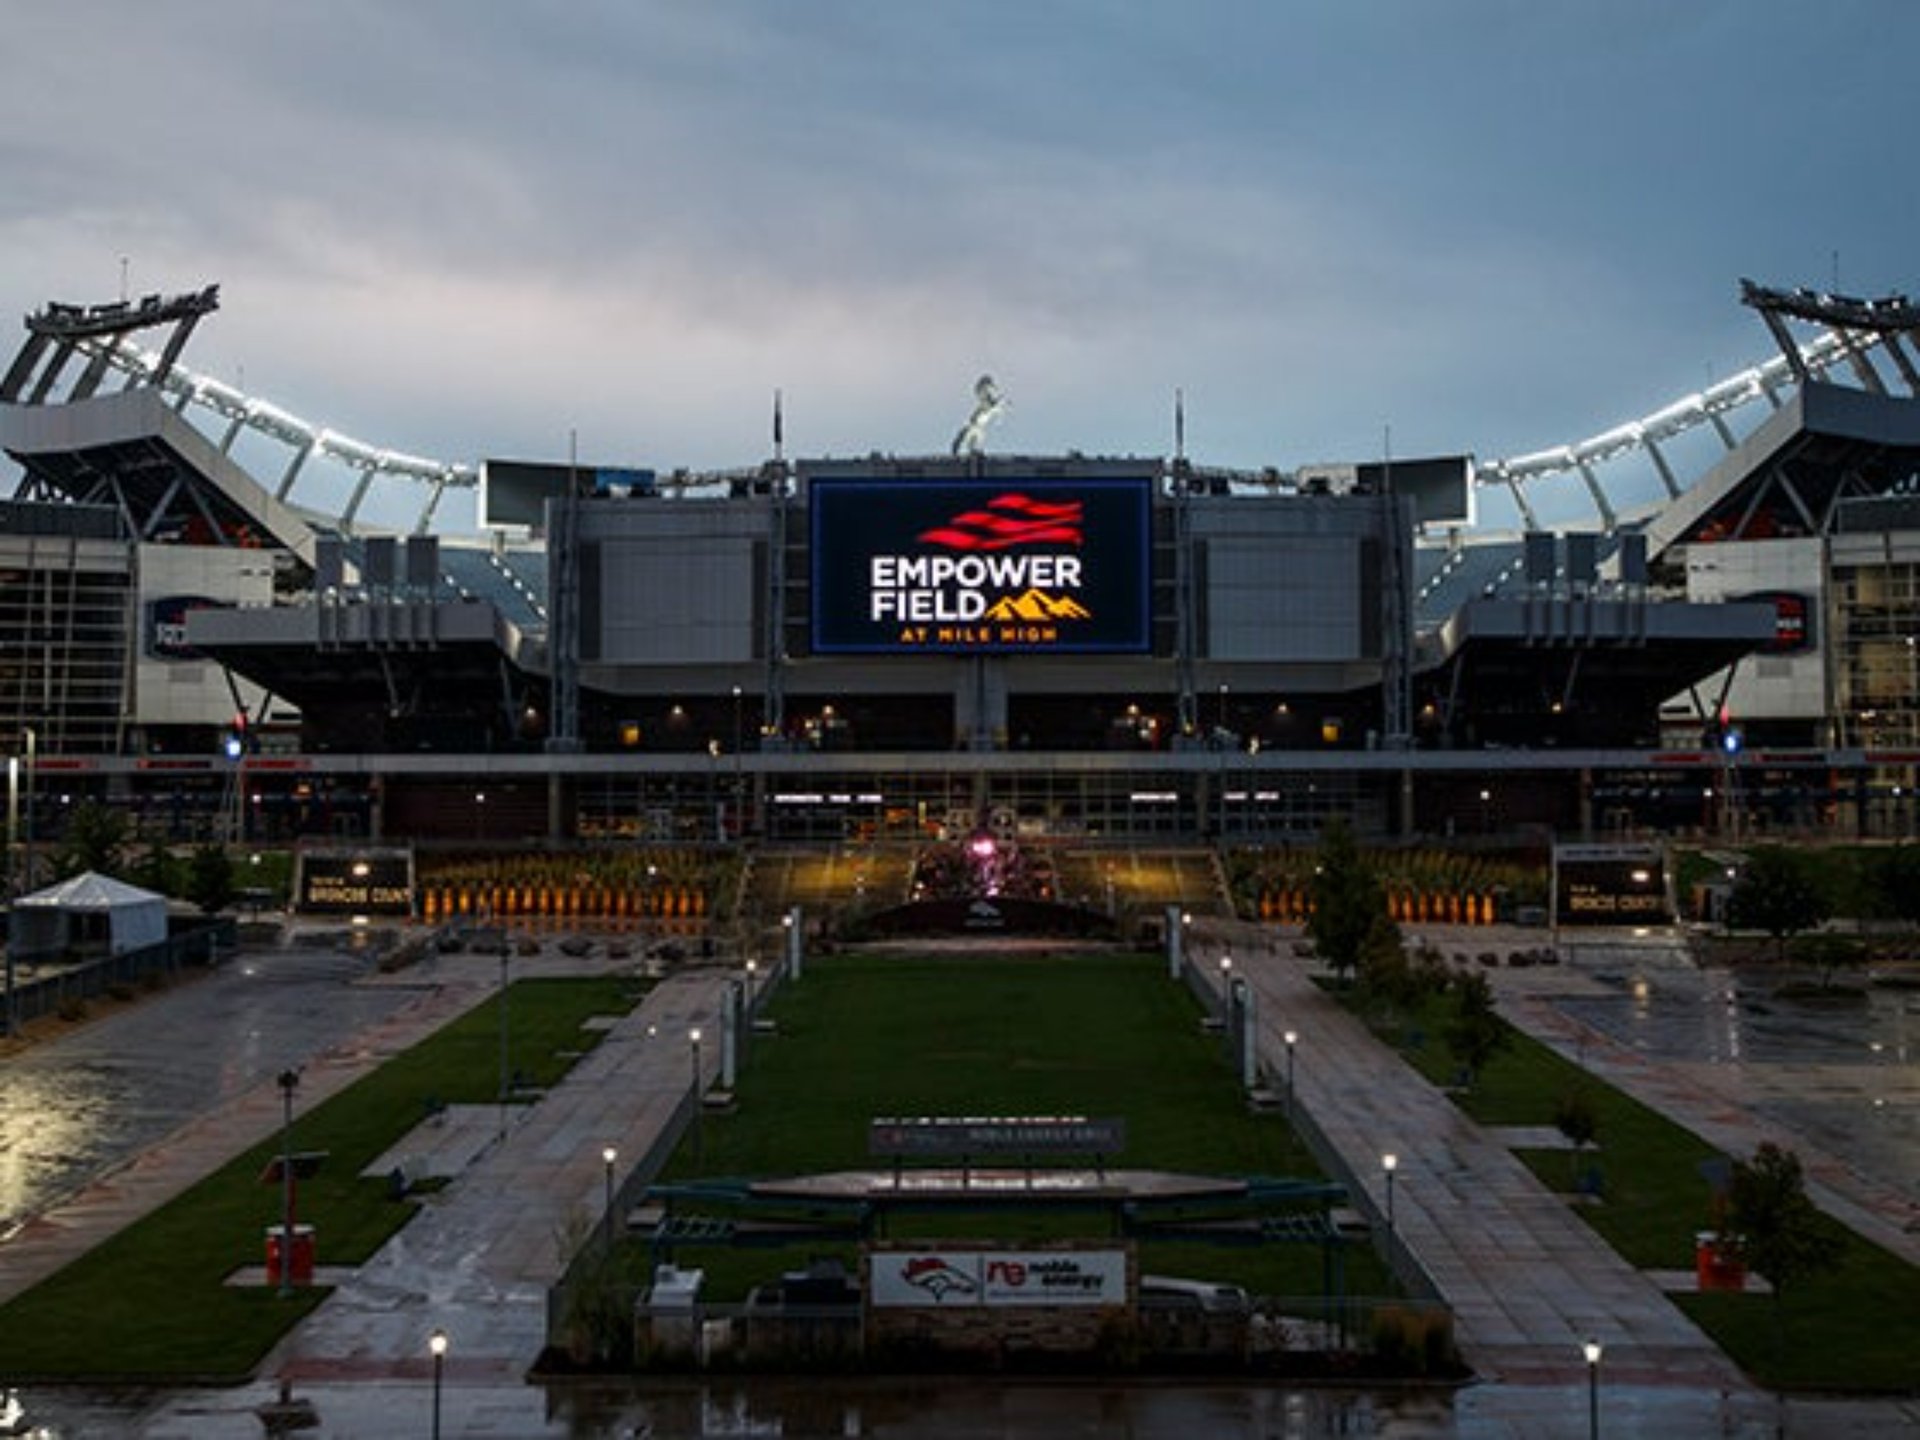 Sports betting lounge to open at Empower Field at Mile High